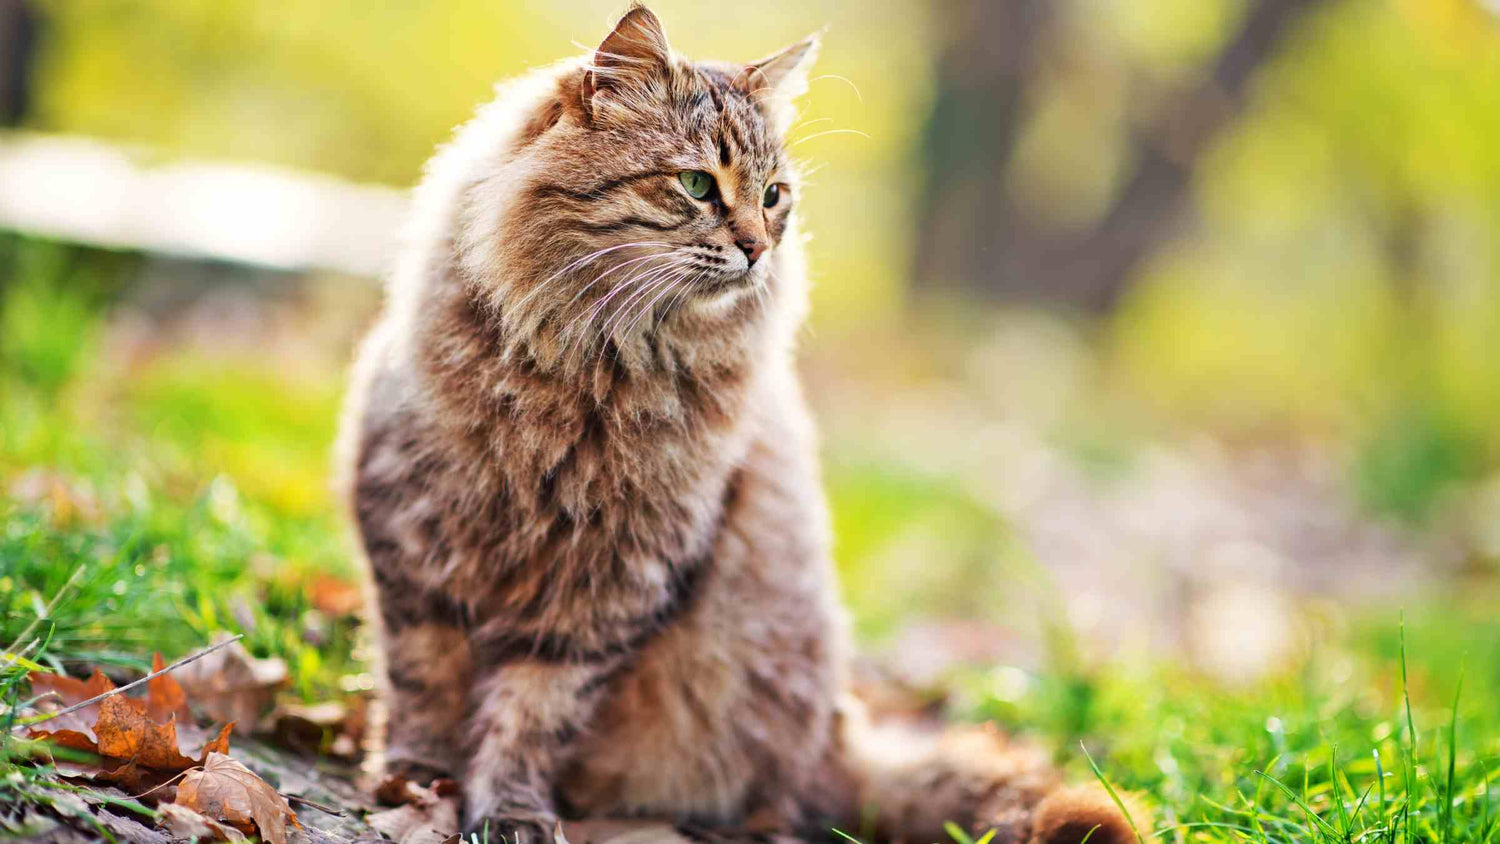 Fluffy tabby cat outside in a natural environment, showing natural, holistic ways to heal your cat.